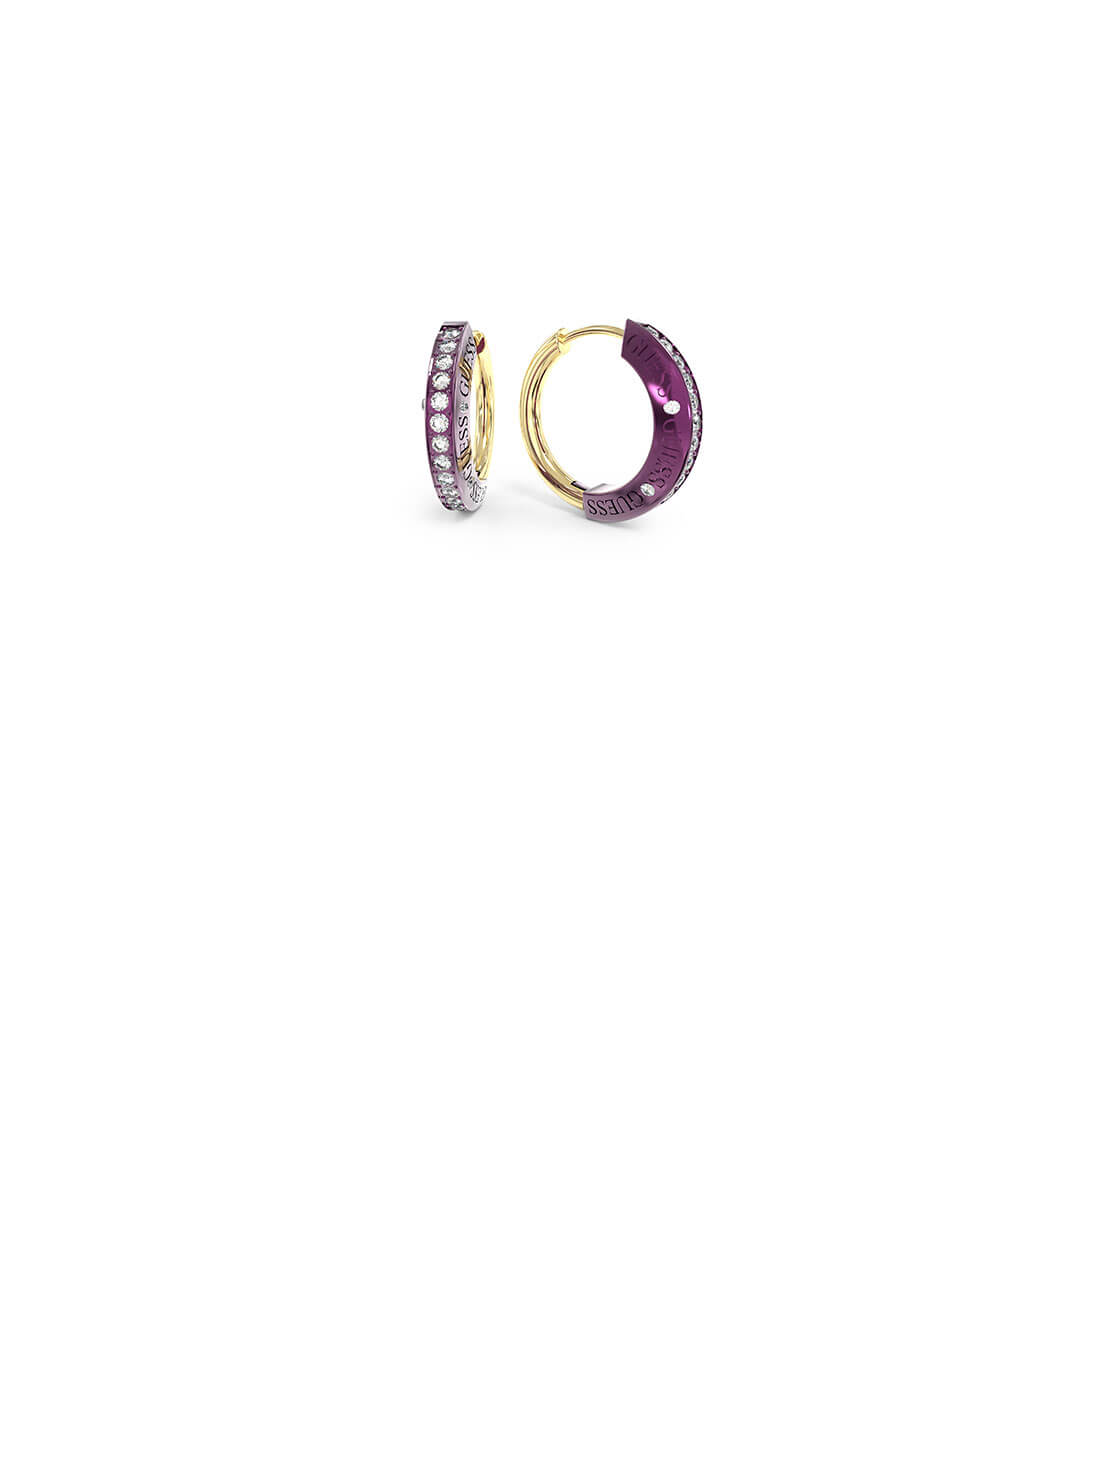 Gold and Purple Guess Bond Earrings | GUESS Women's Jewellery | front view